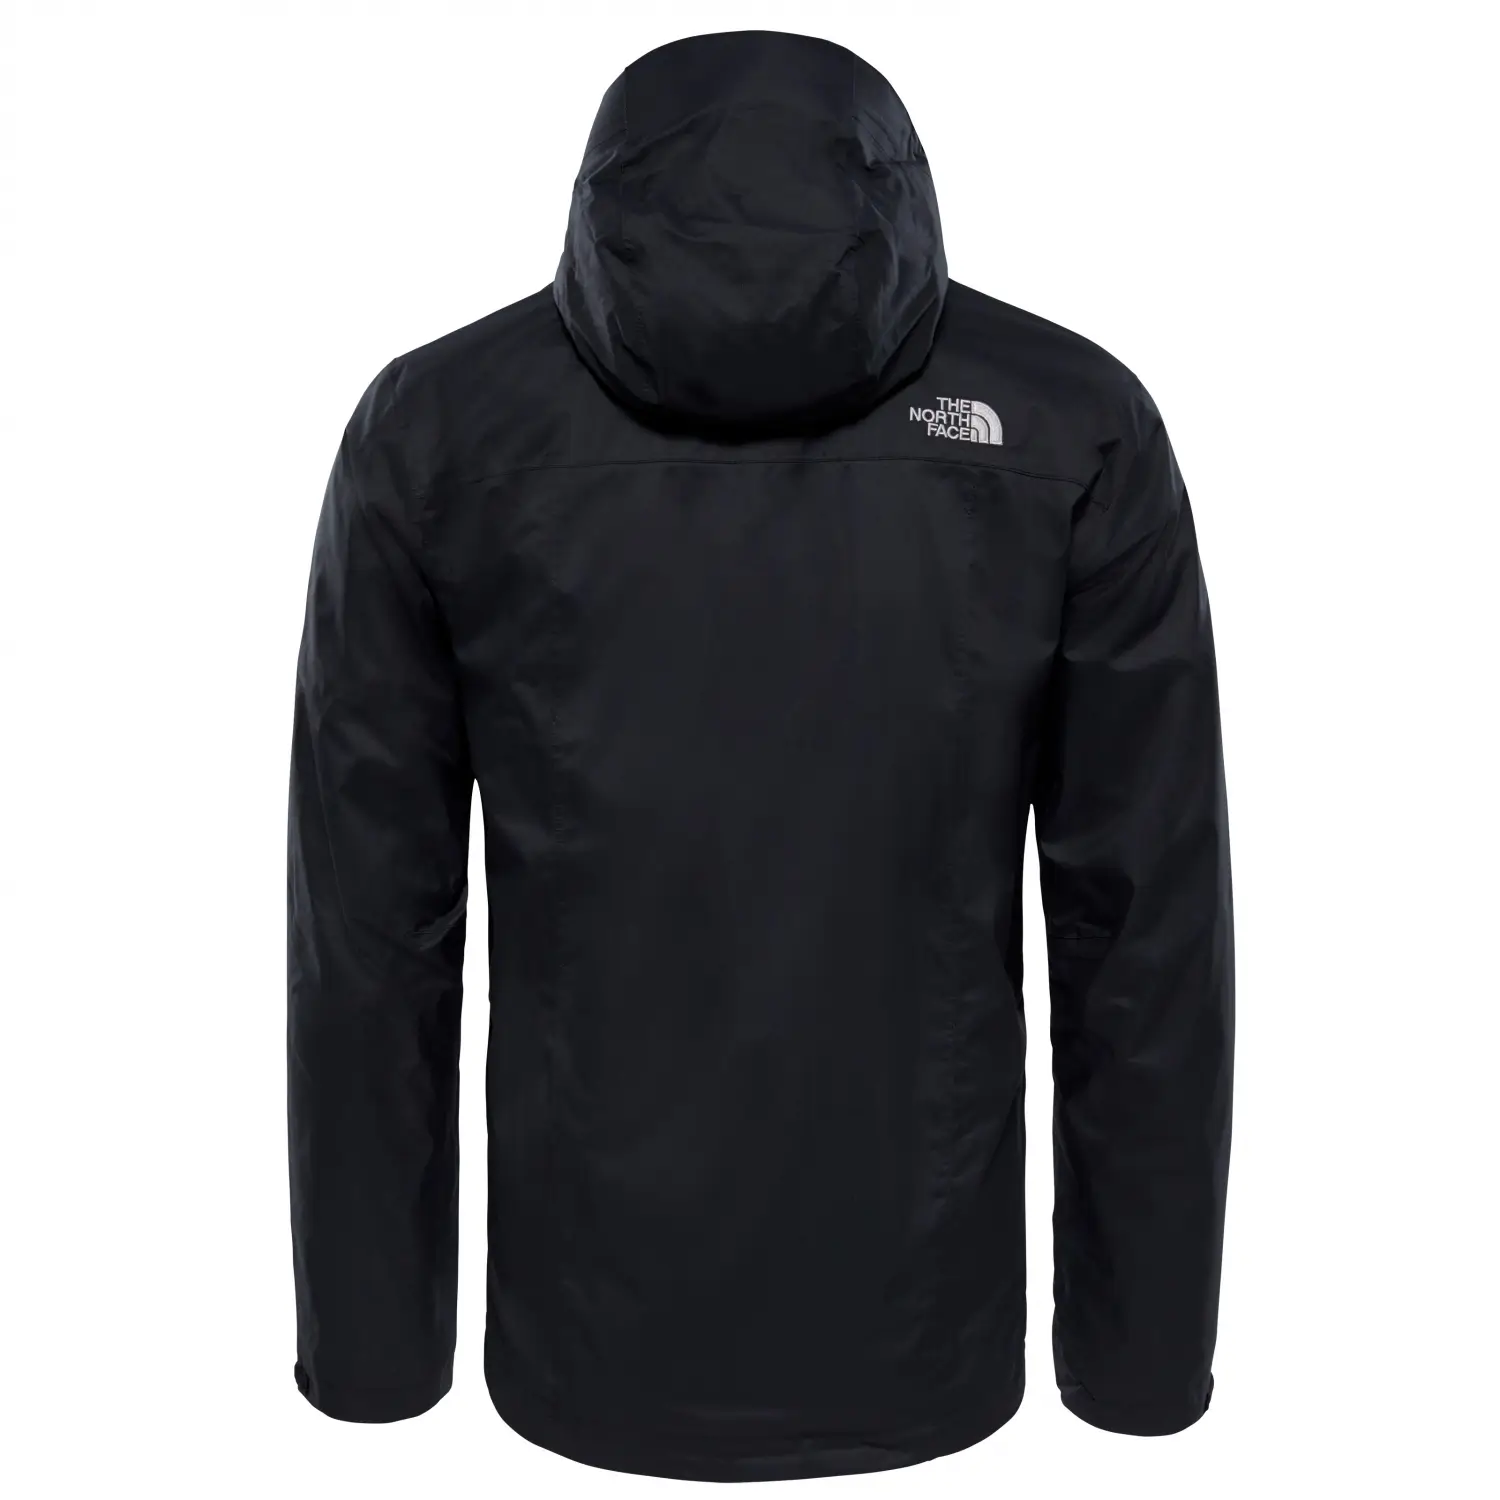 The North Face Evolve II Triclimate Siyah Erkek Mont - NF00CG55JK31